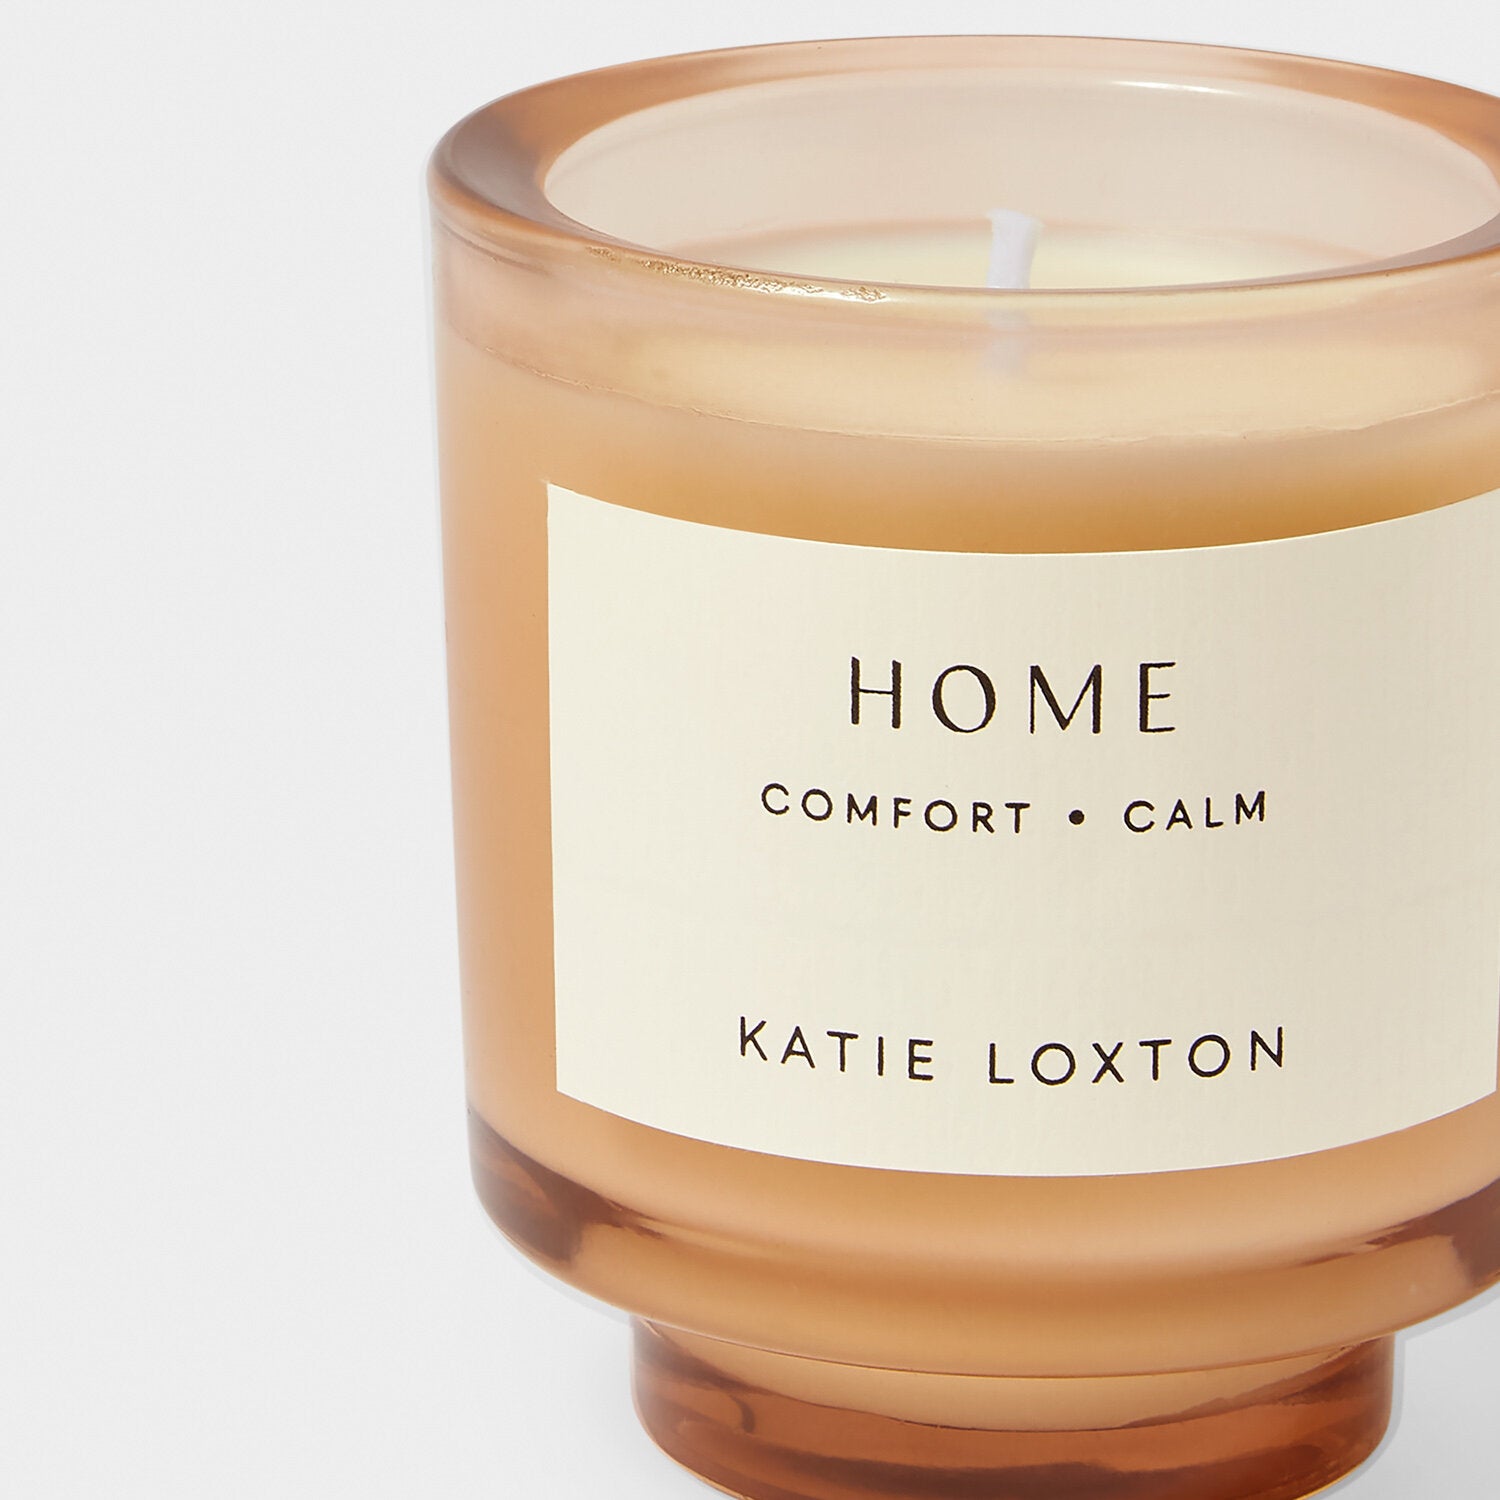 Sentiment Candle 'Home' - Katie Loxton